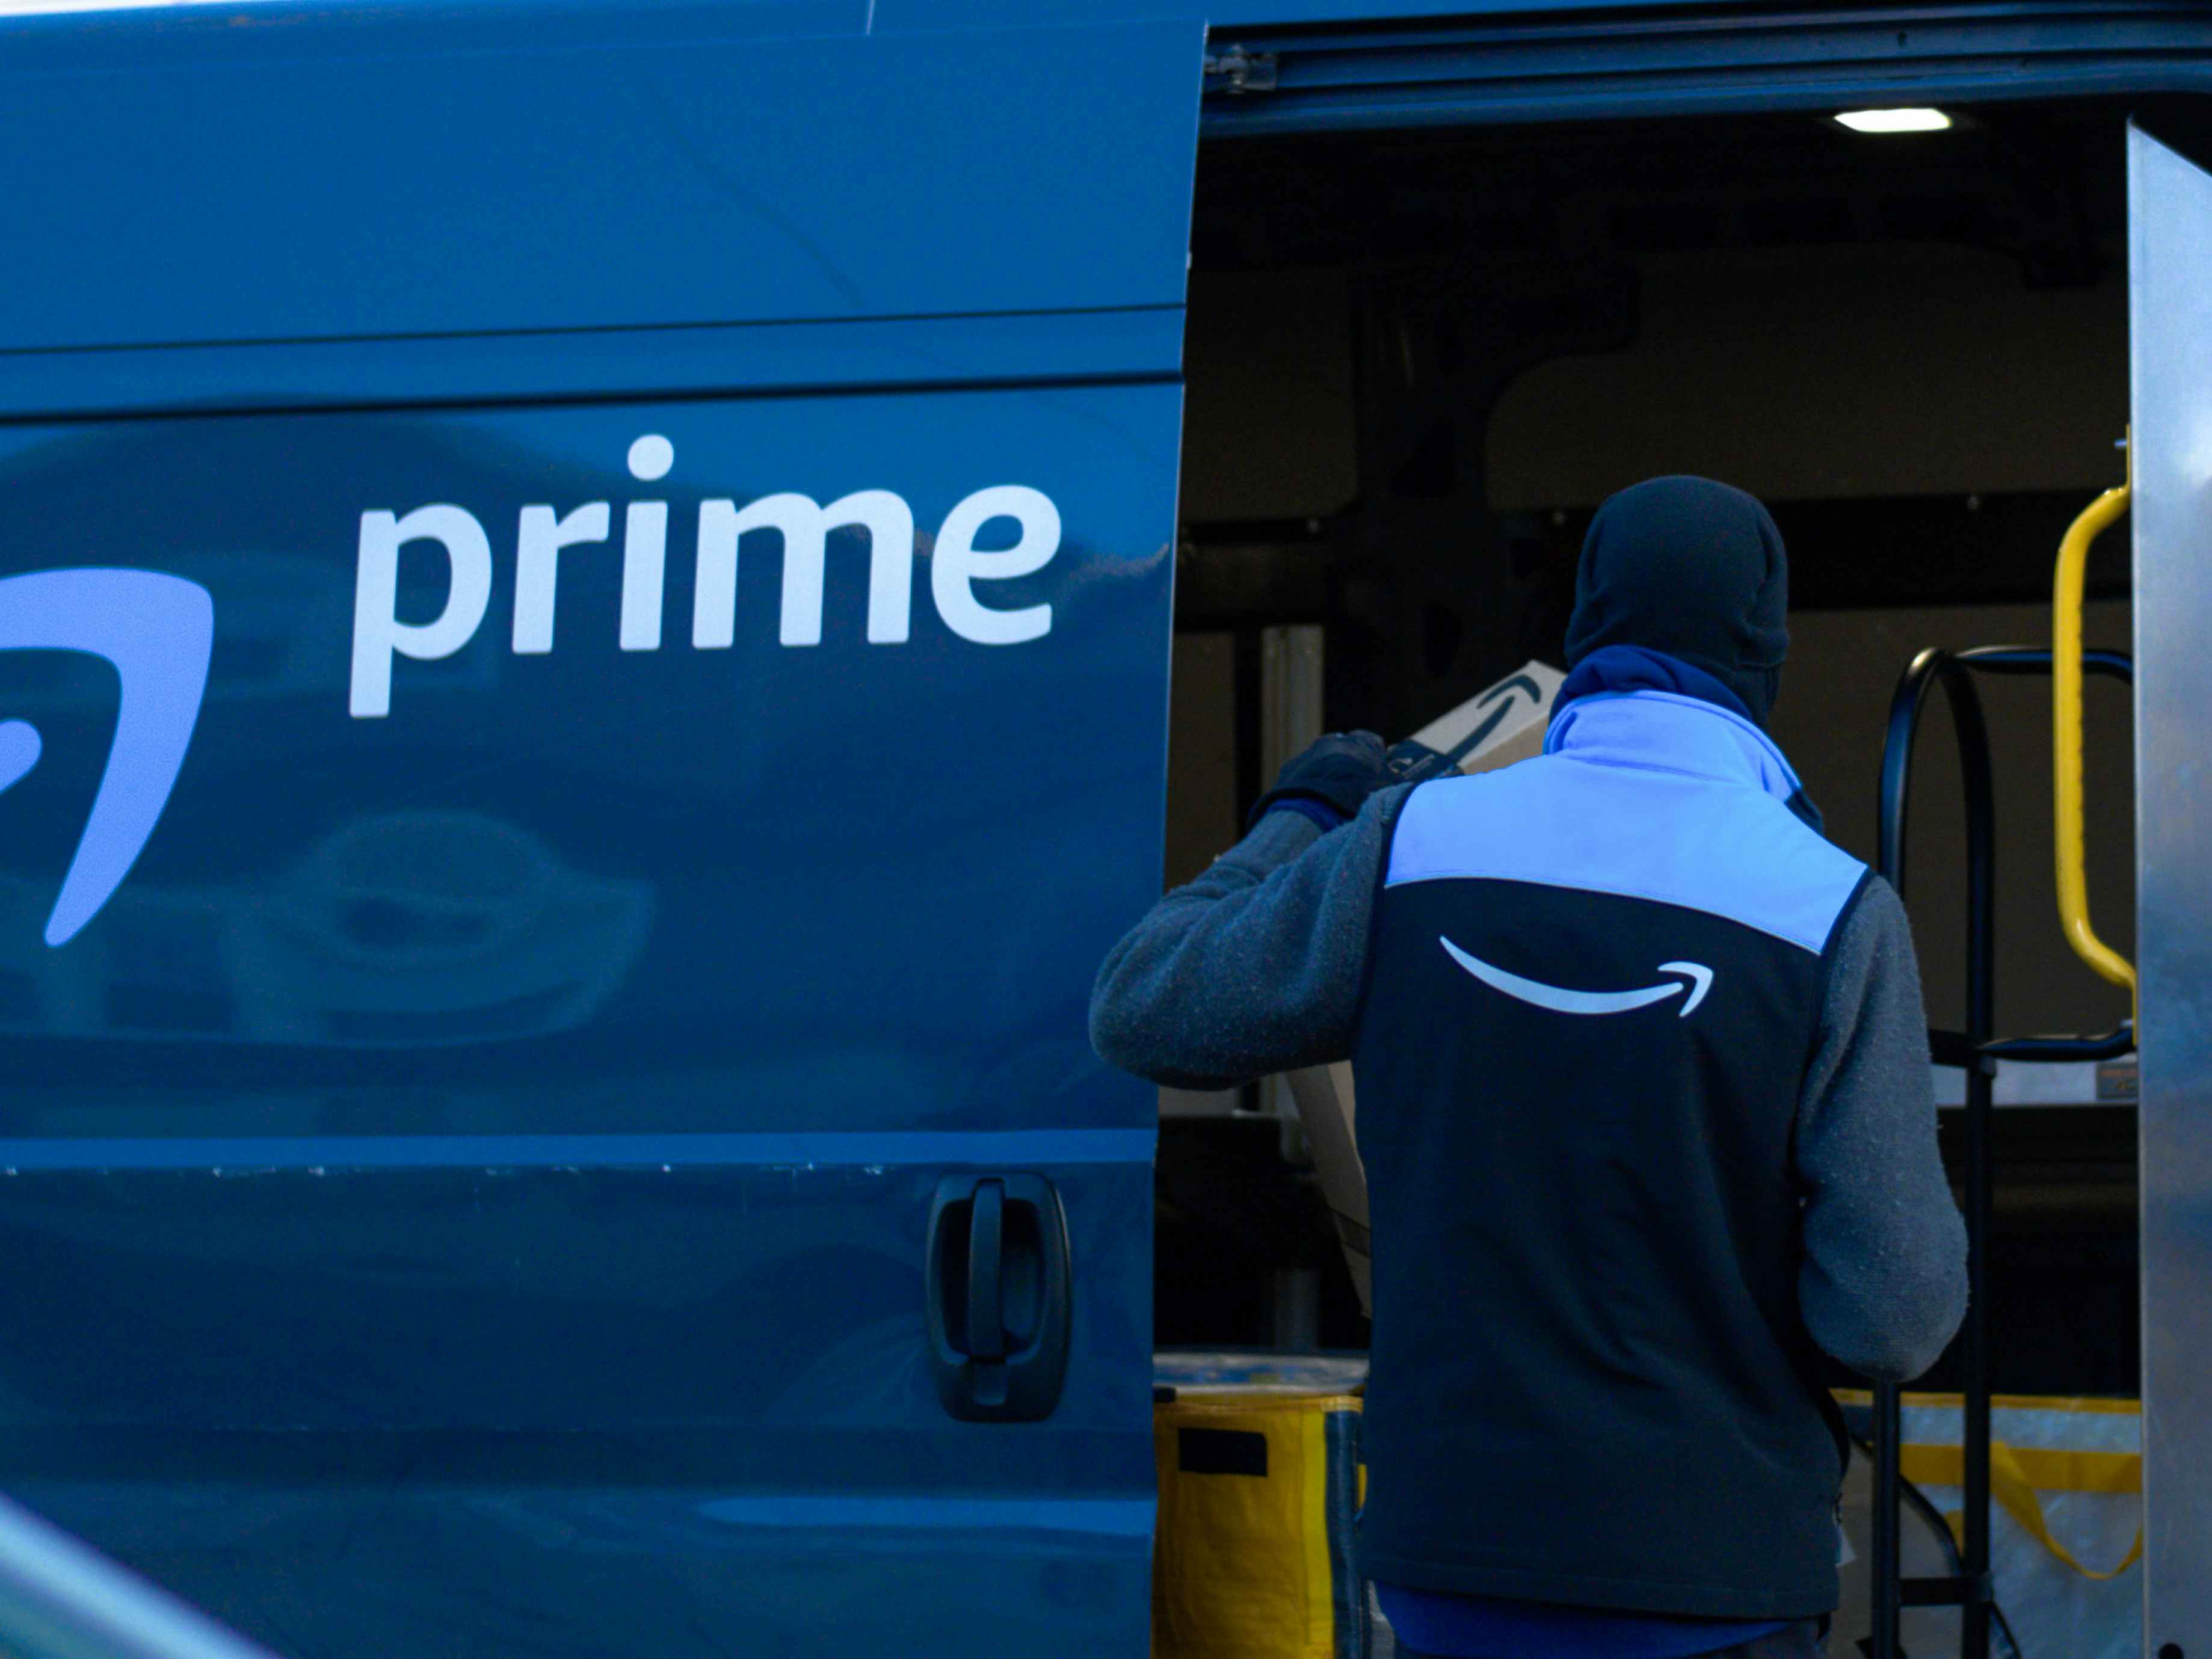 An Amazon delivery van driver opening the side door of the van to grab a package.